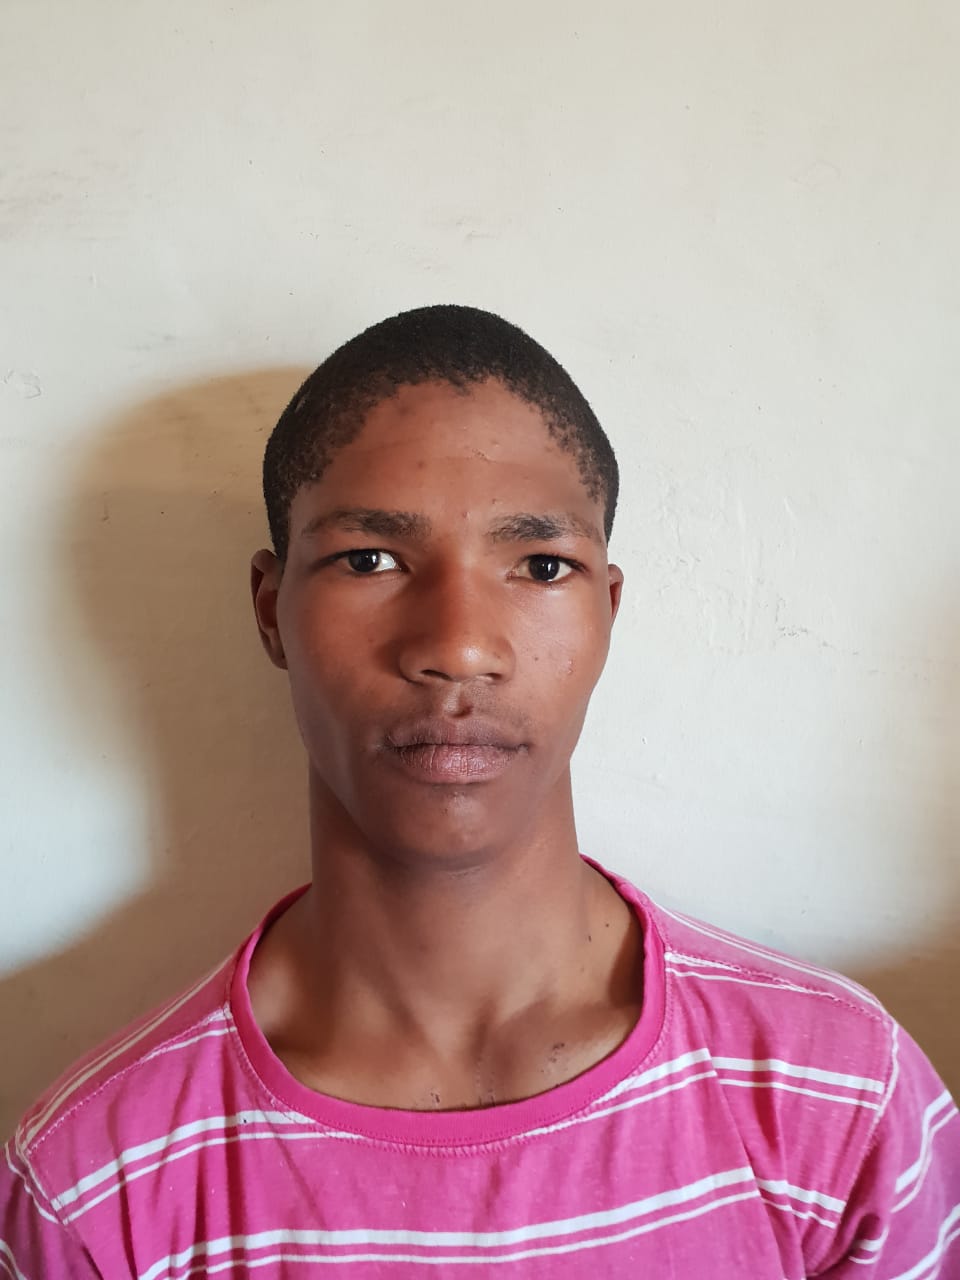 Gang affiliate sentenced to life plus 31 years imprisonment in Port Elizabeth